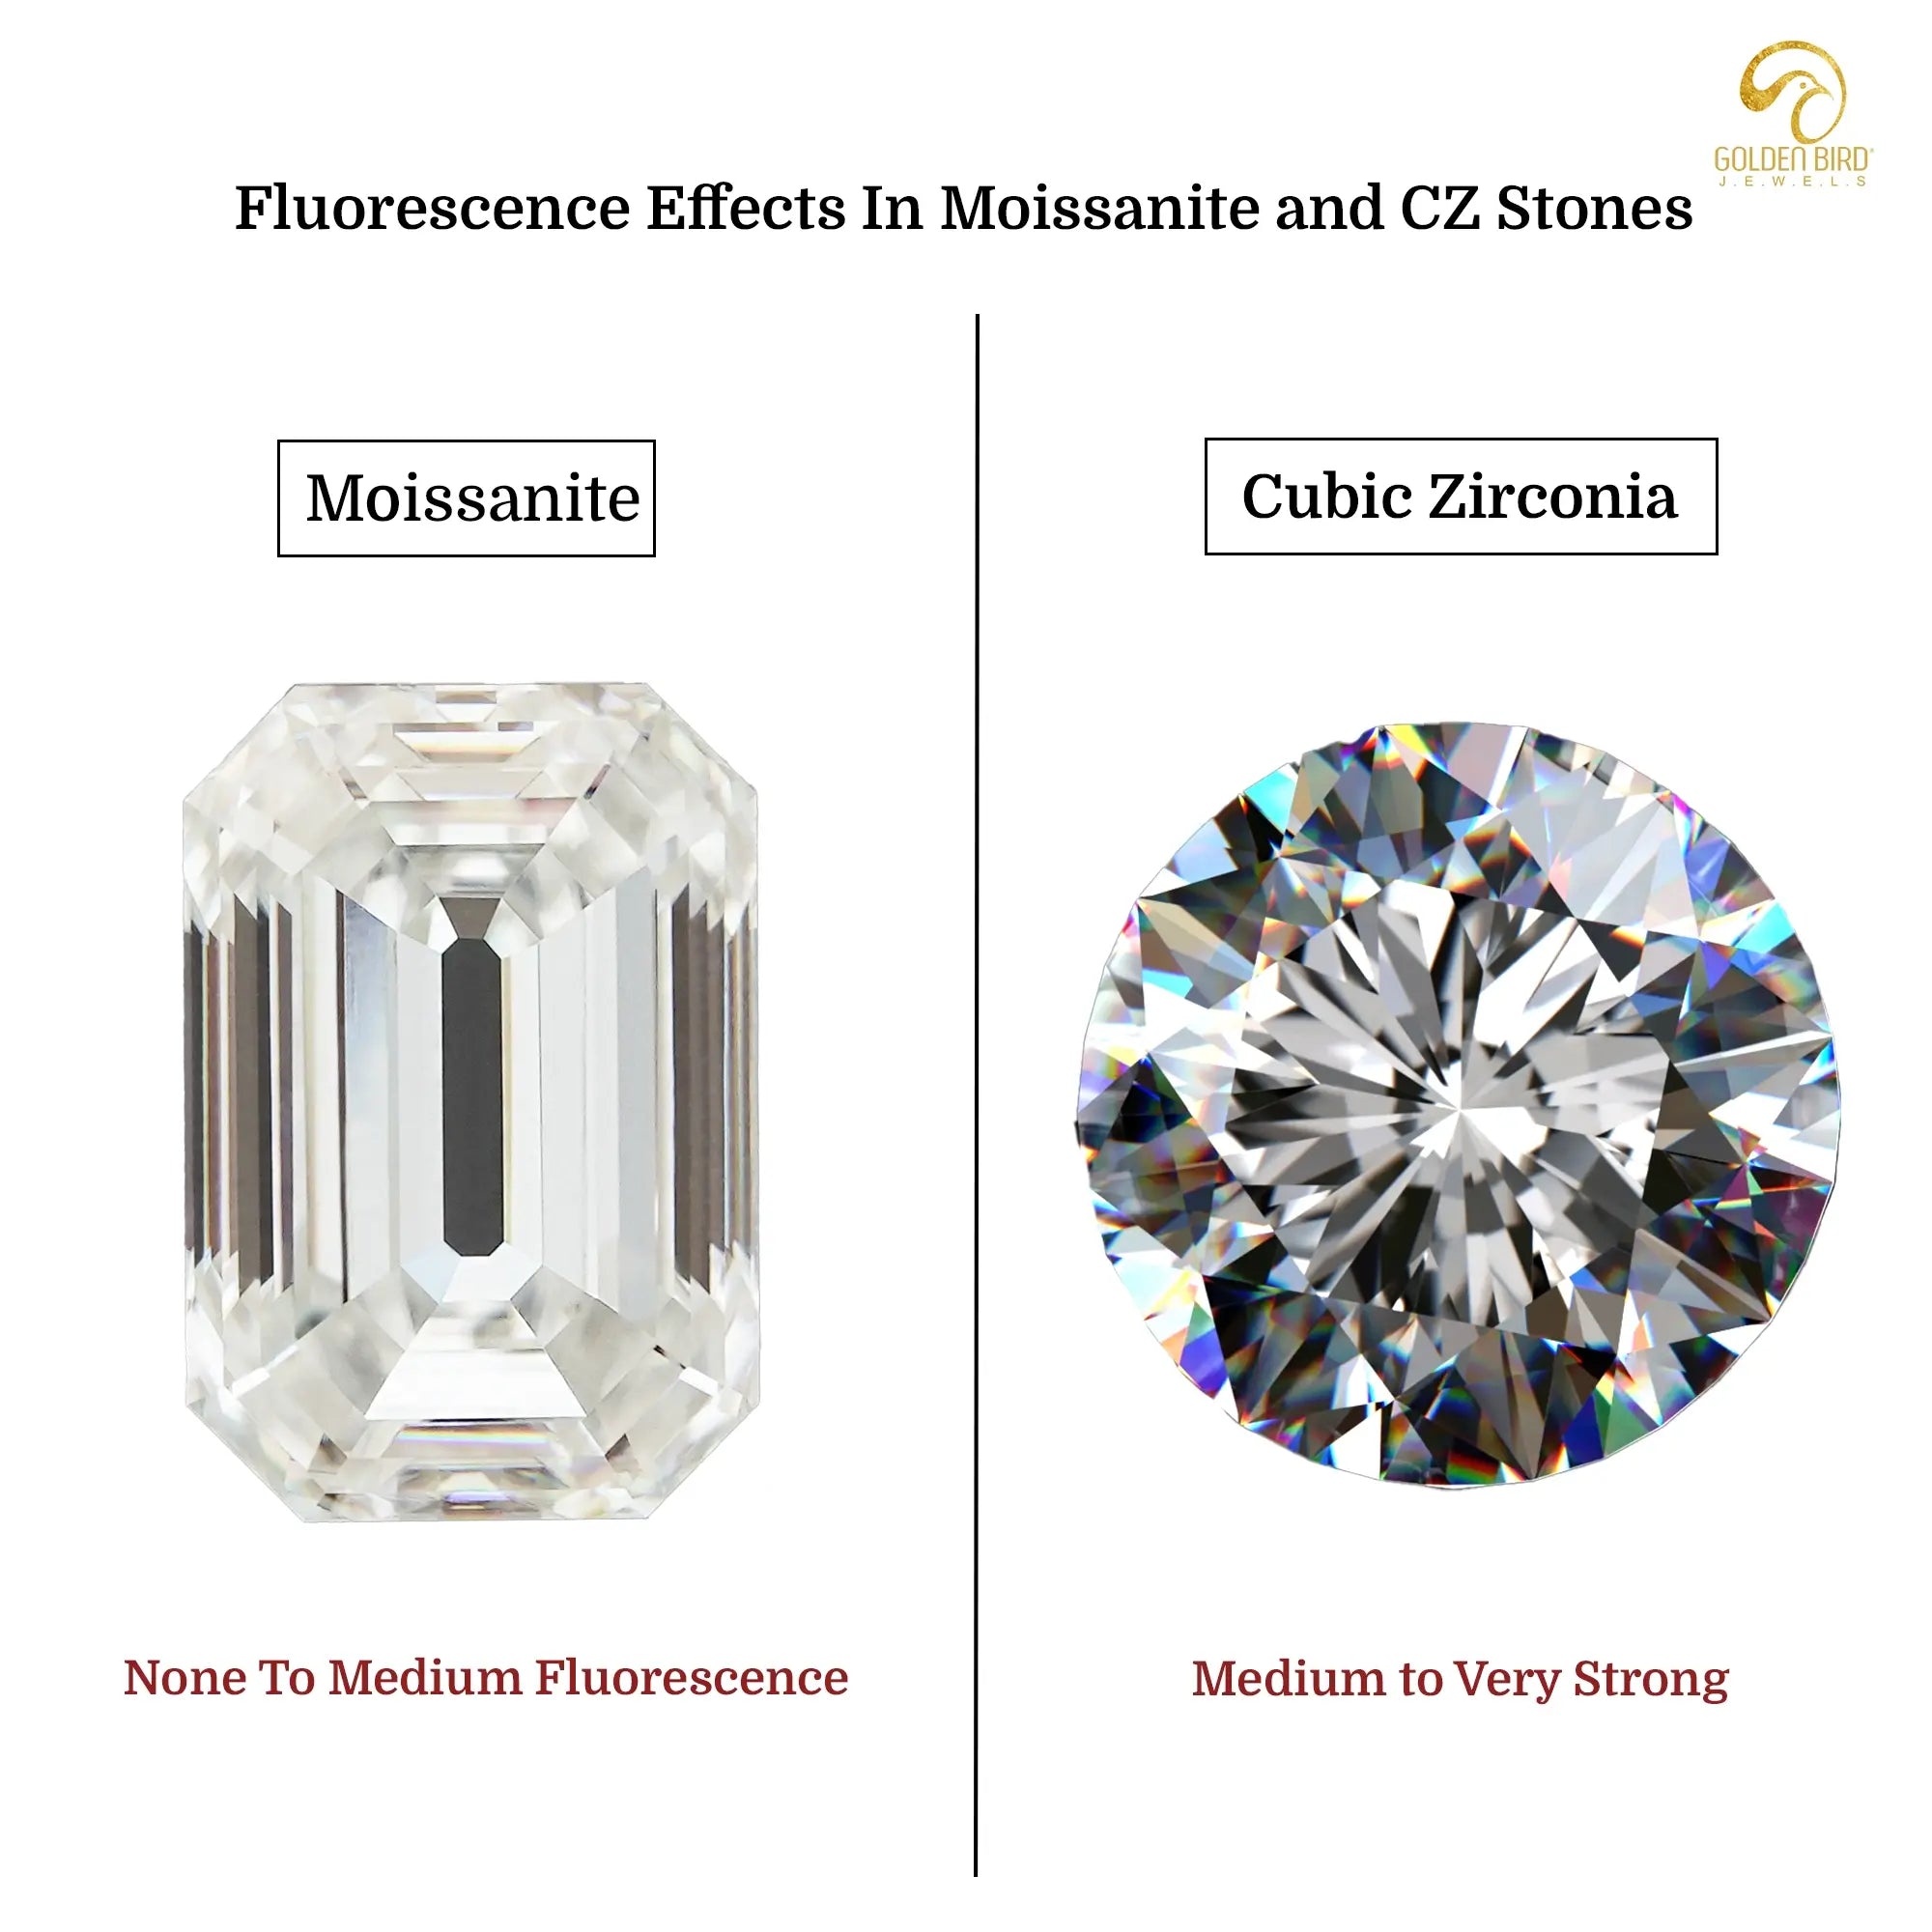 Fluorescence effect in moissanite and cubic zirconia synthetic stones